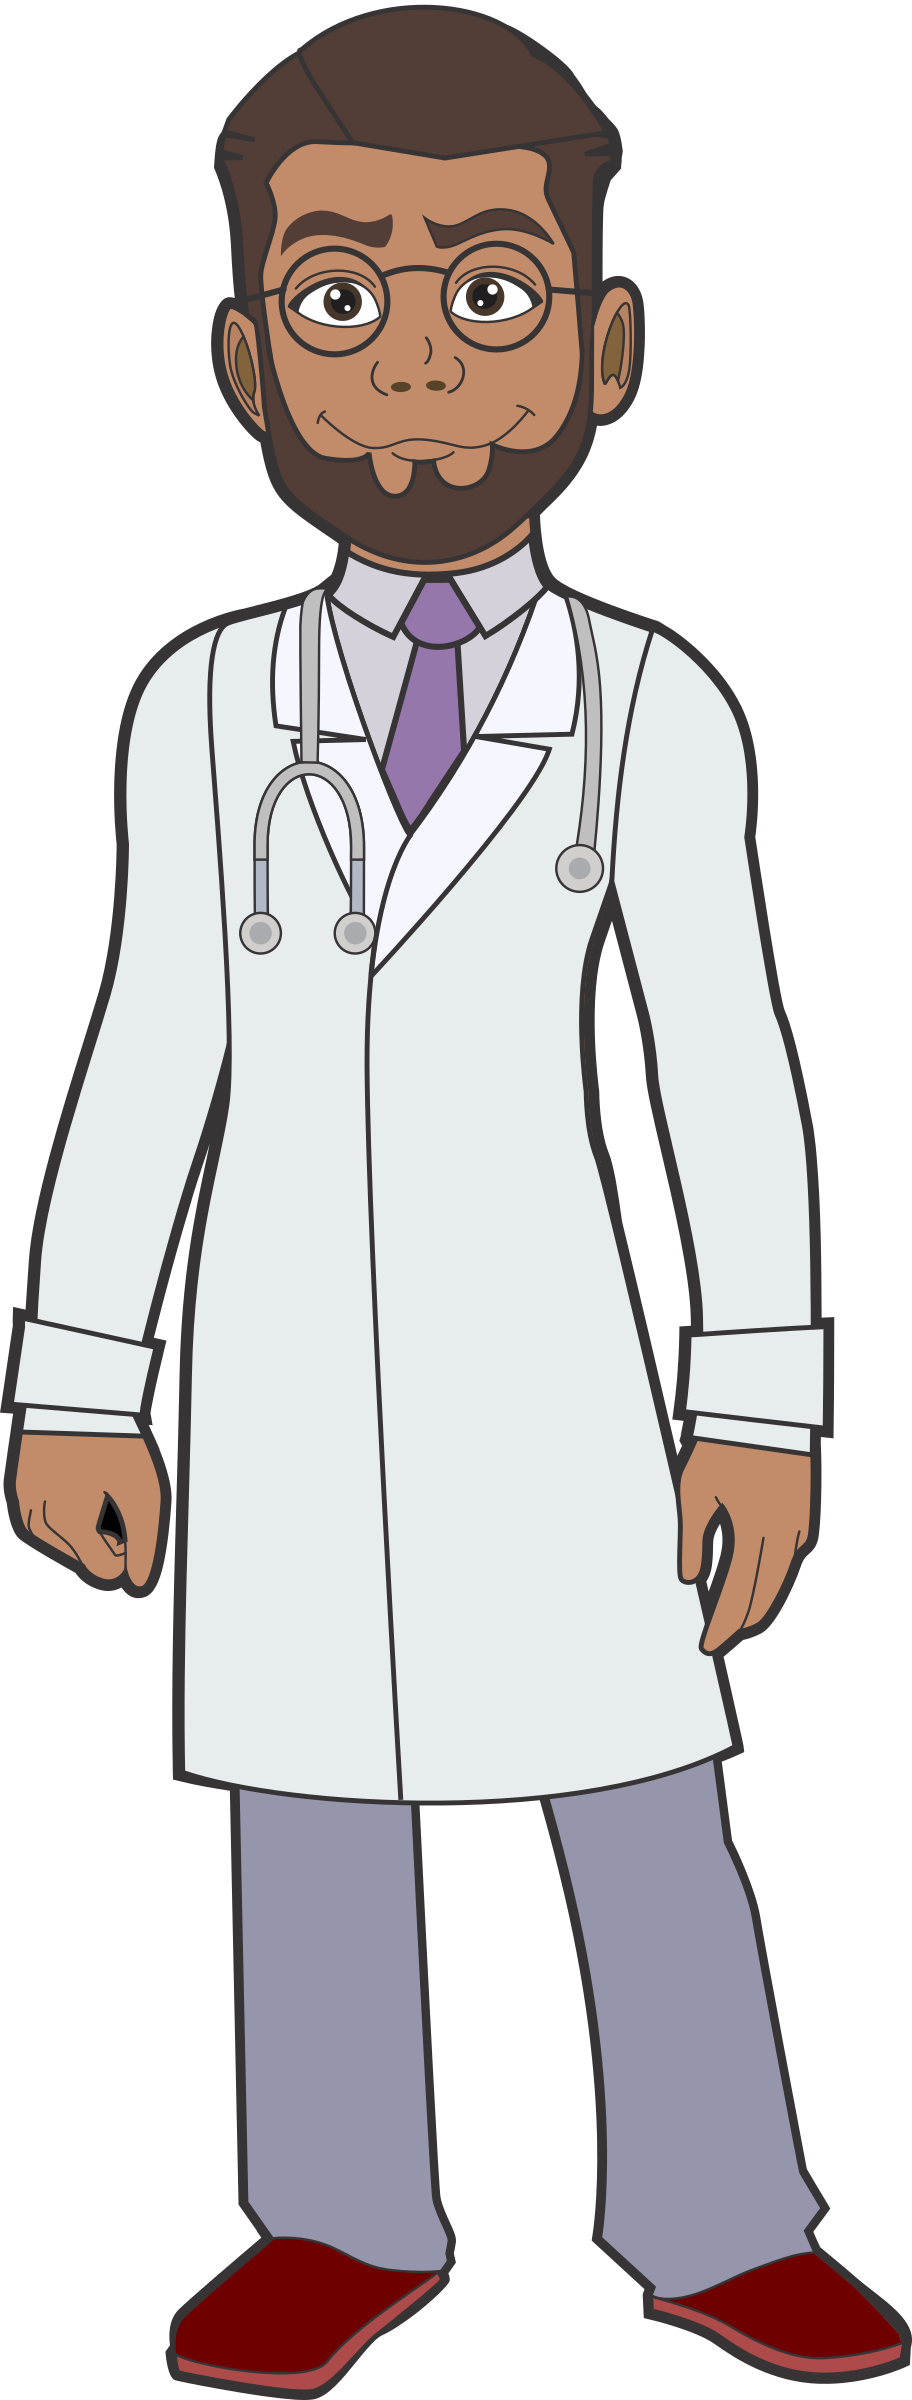 Clothing clipart doctor, Clothing doctor Transparent FREE.